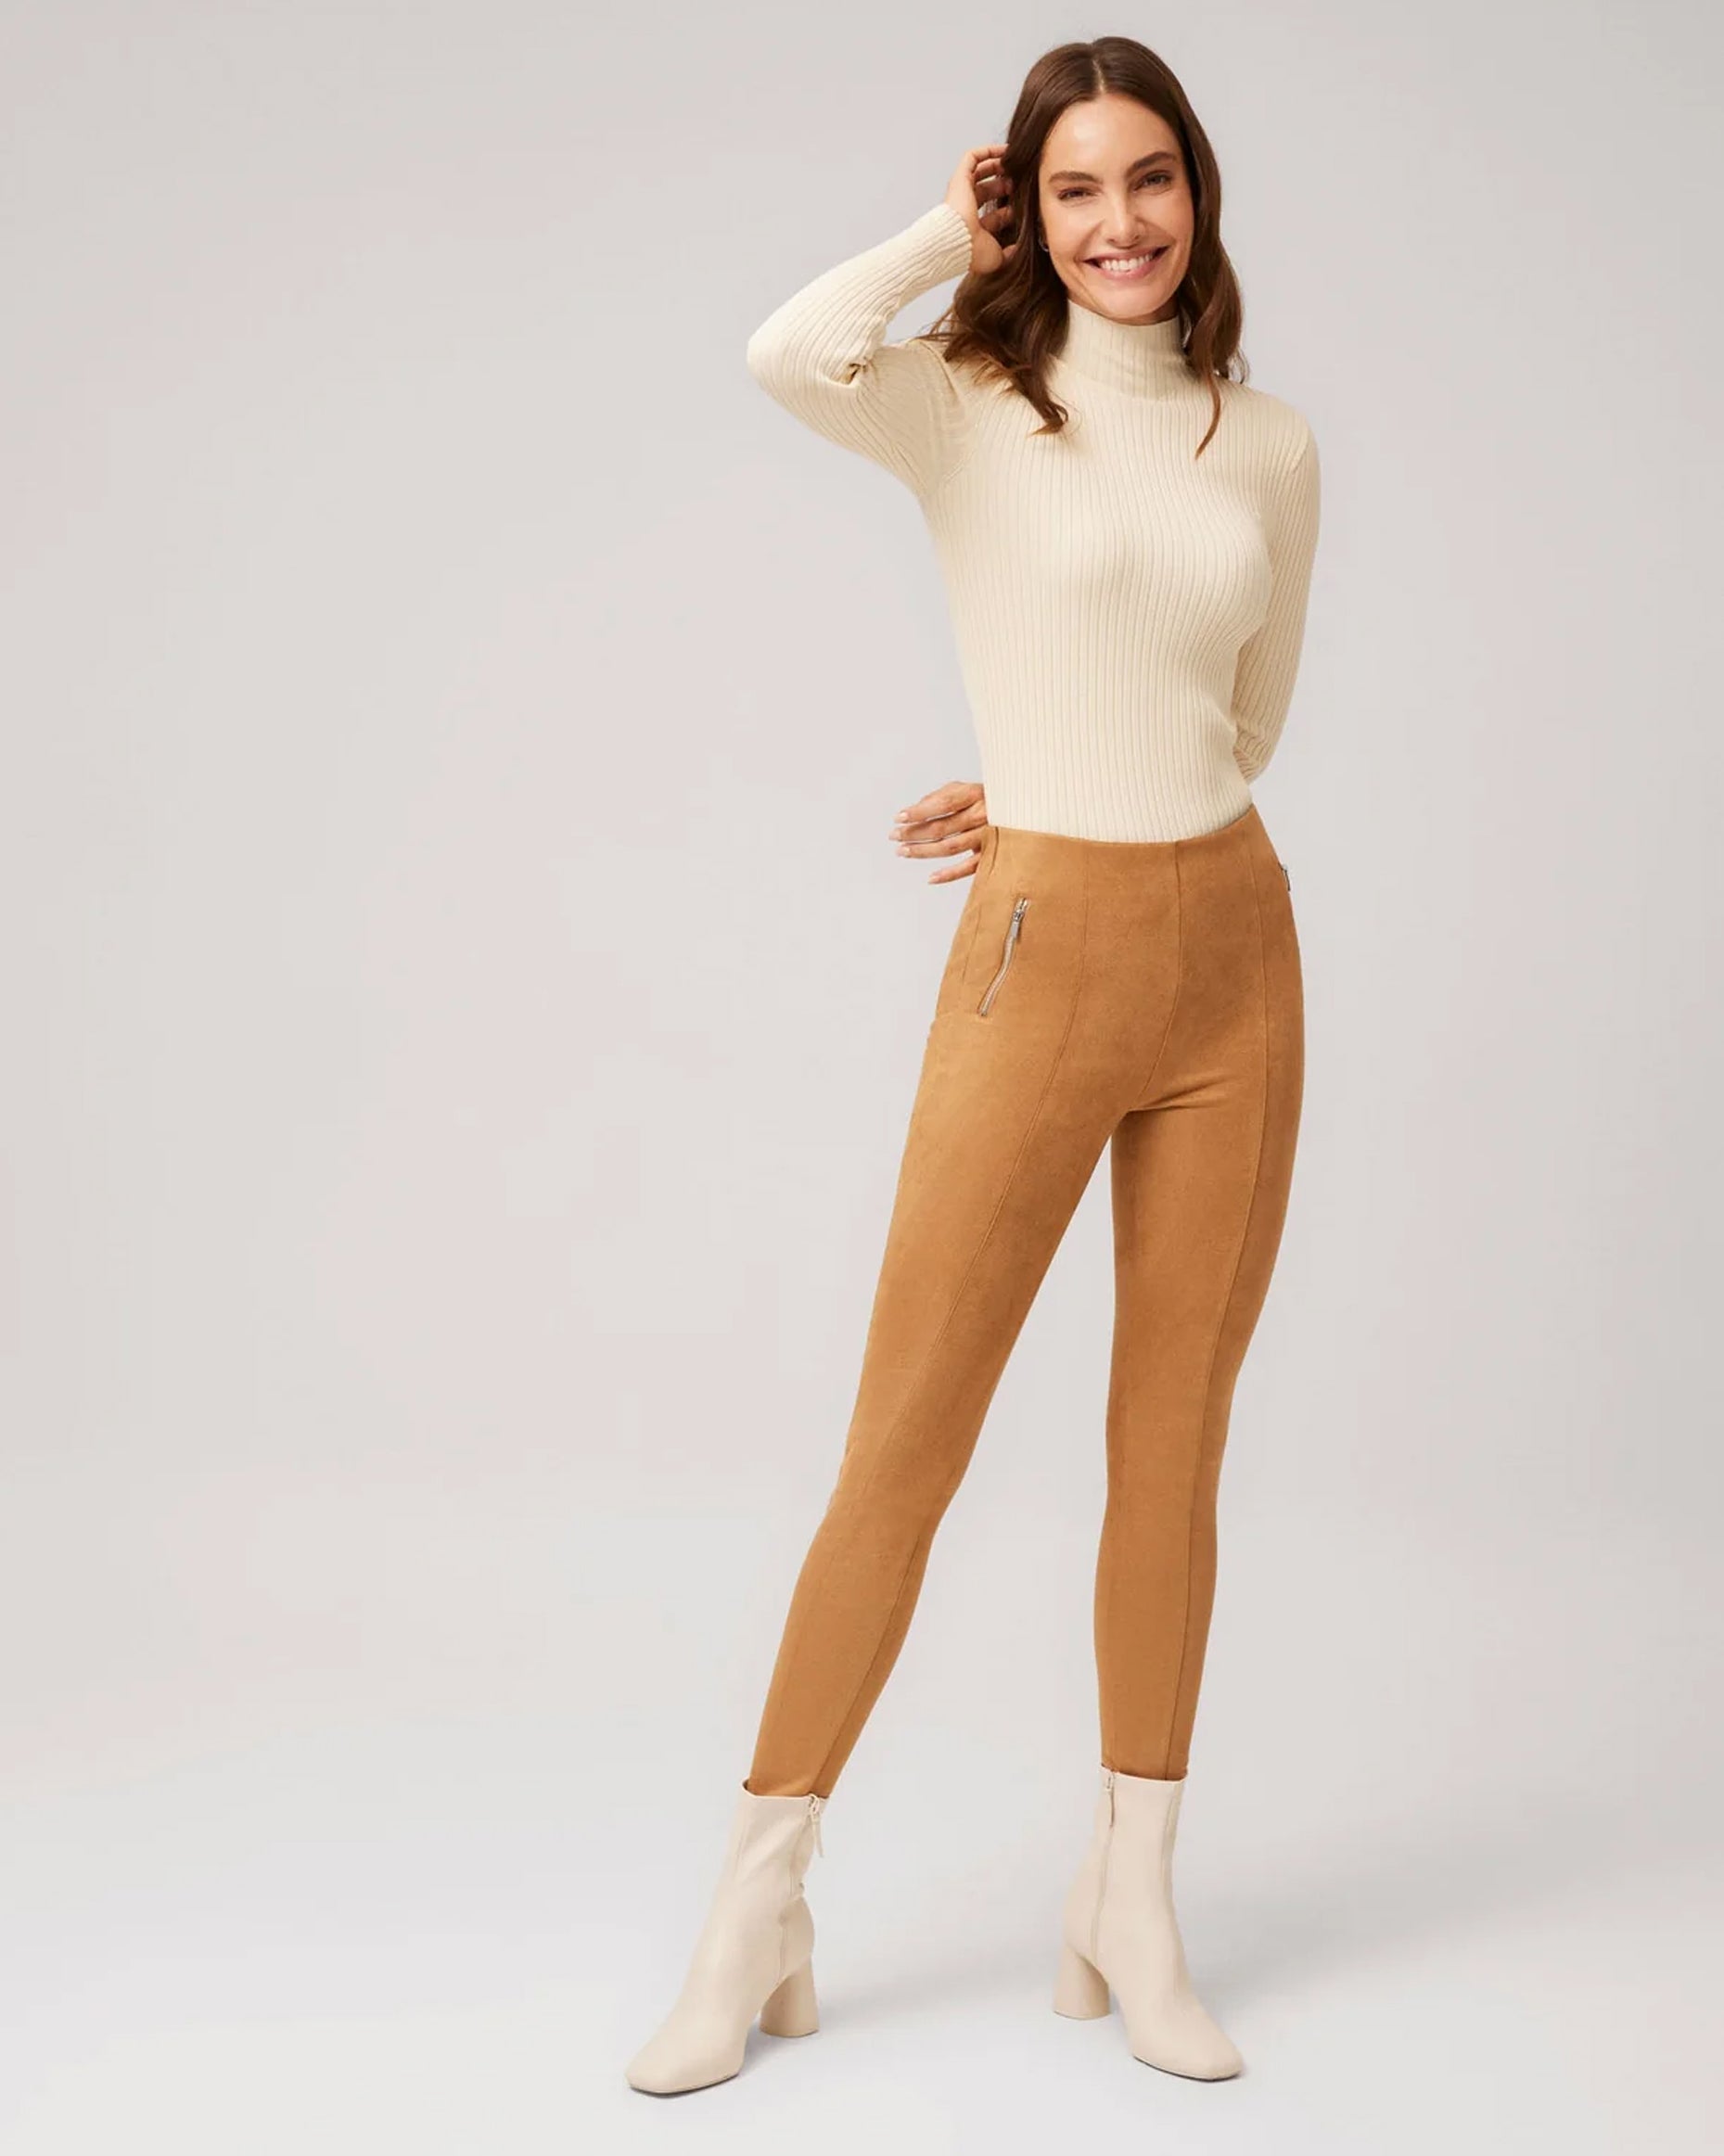 Ysabel Mora 70297 Faux Suede Leggings - Camel / tan plush velour suede effect high waisted trouser leggings, worn with ivory heeled ankle boots and cream turtle neck top.